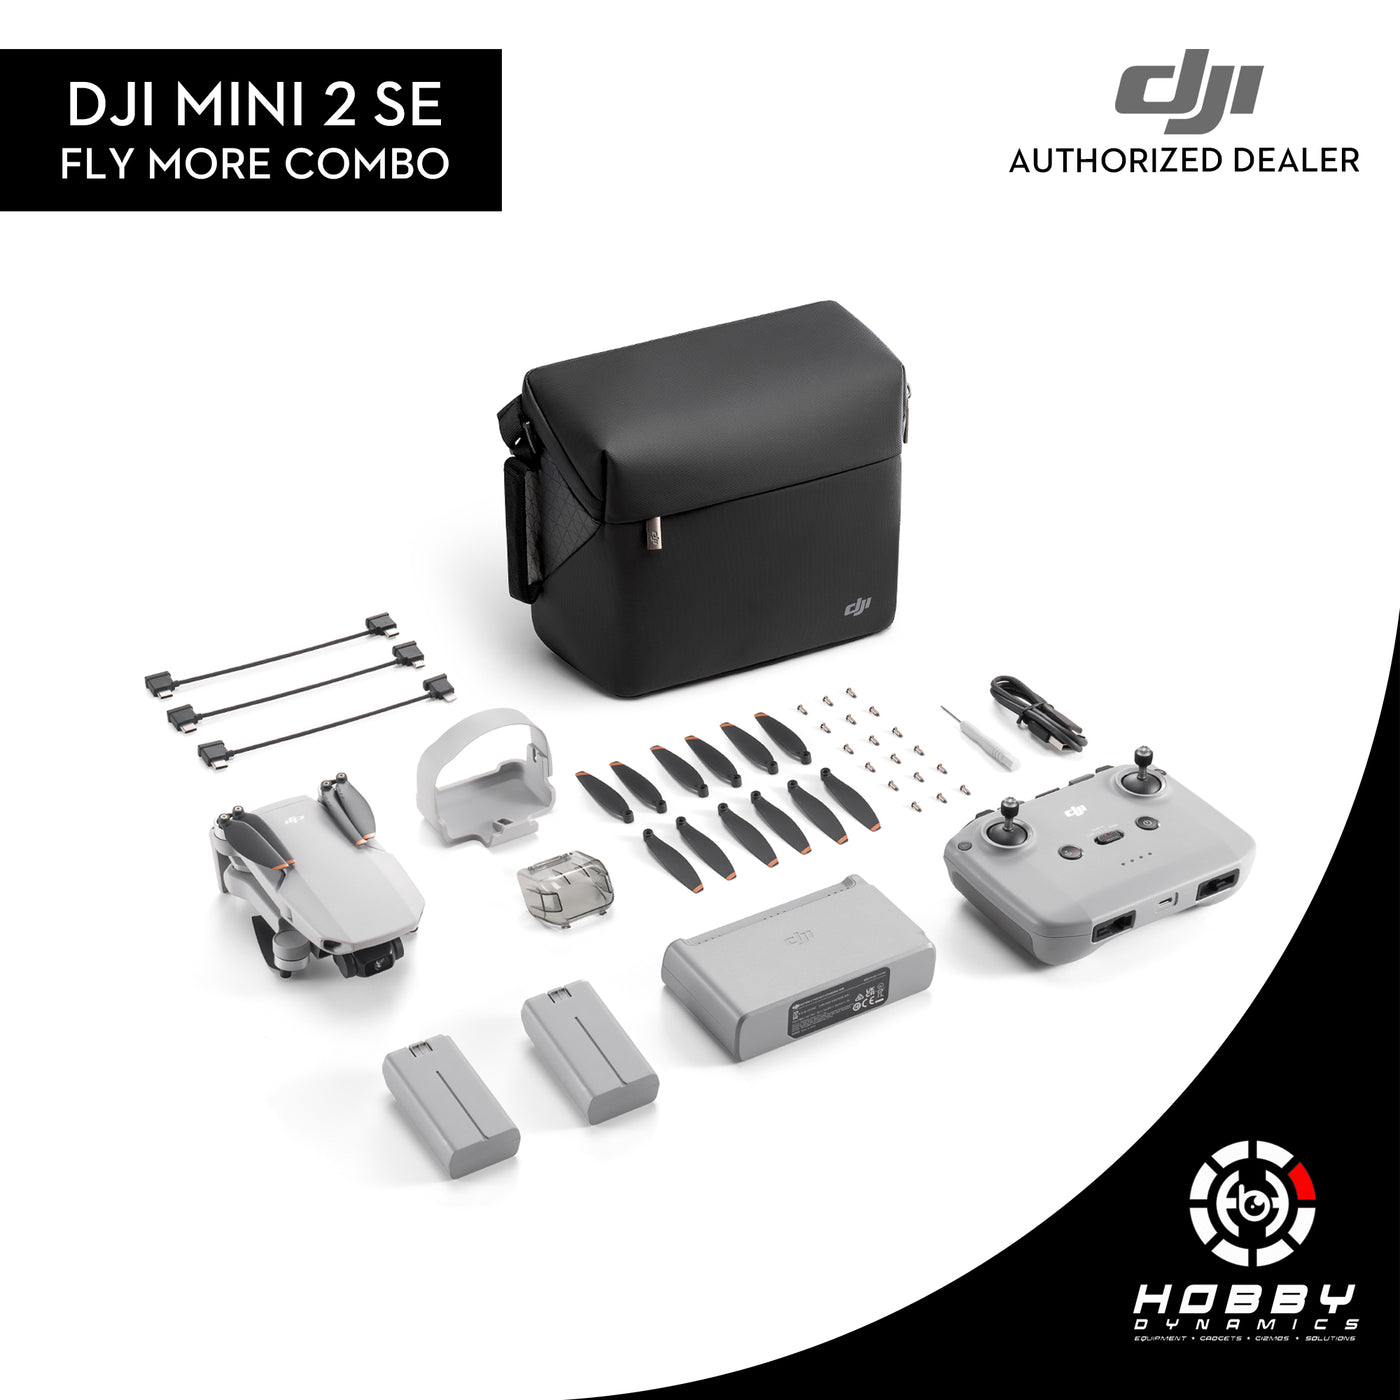 DJI Mini 2 SE Fly More Combo with FREE Sandisk Extreme 64GB SD Card